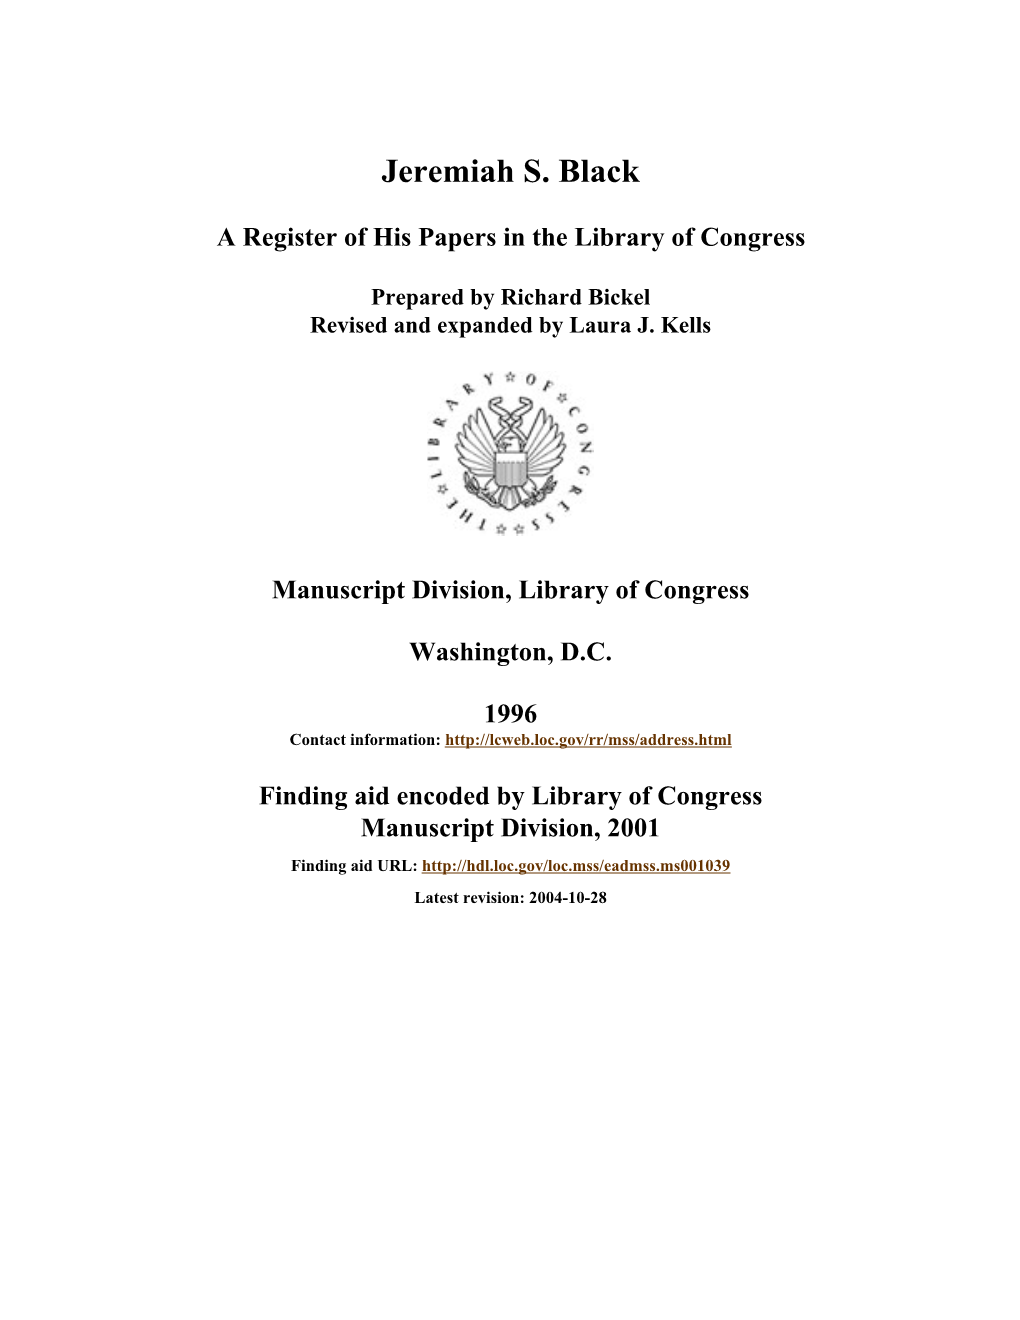 Papers of Jeremiah S. Black [Finding Aid]. Library of Congress